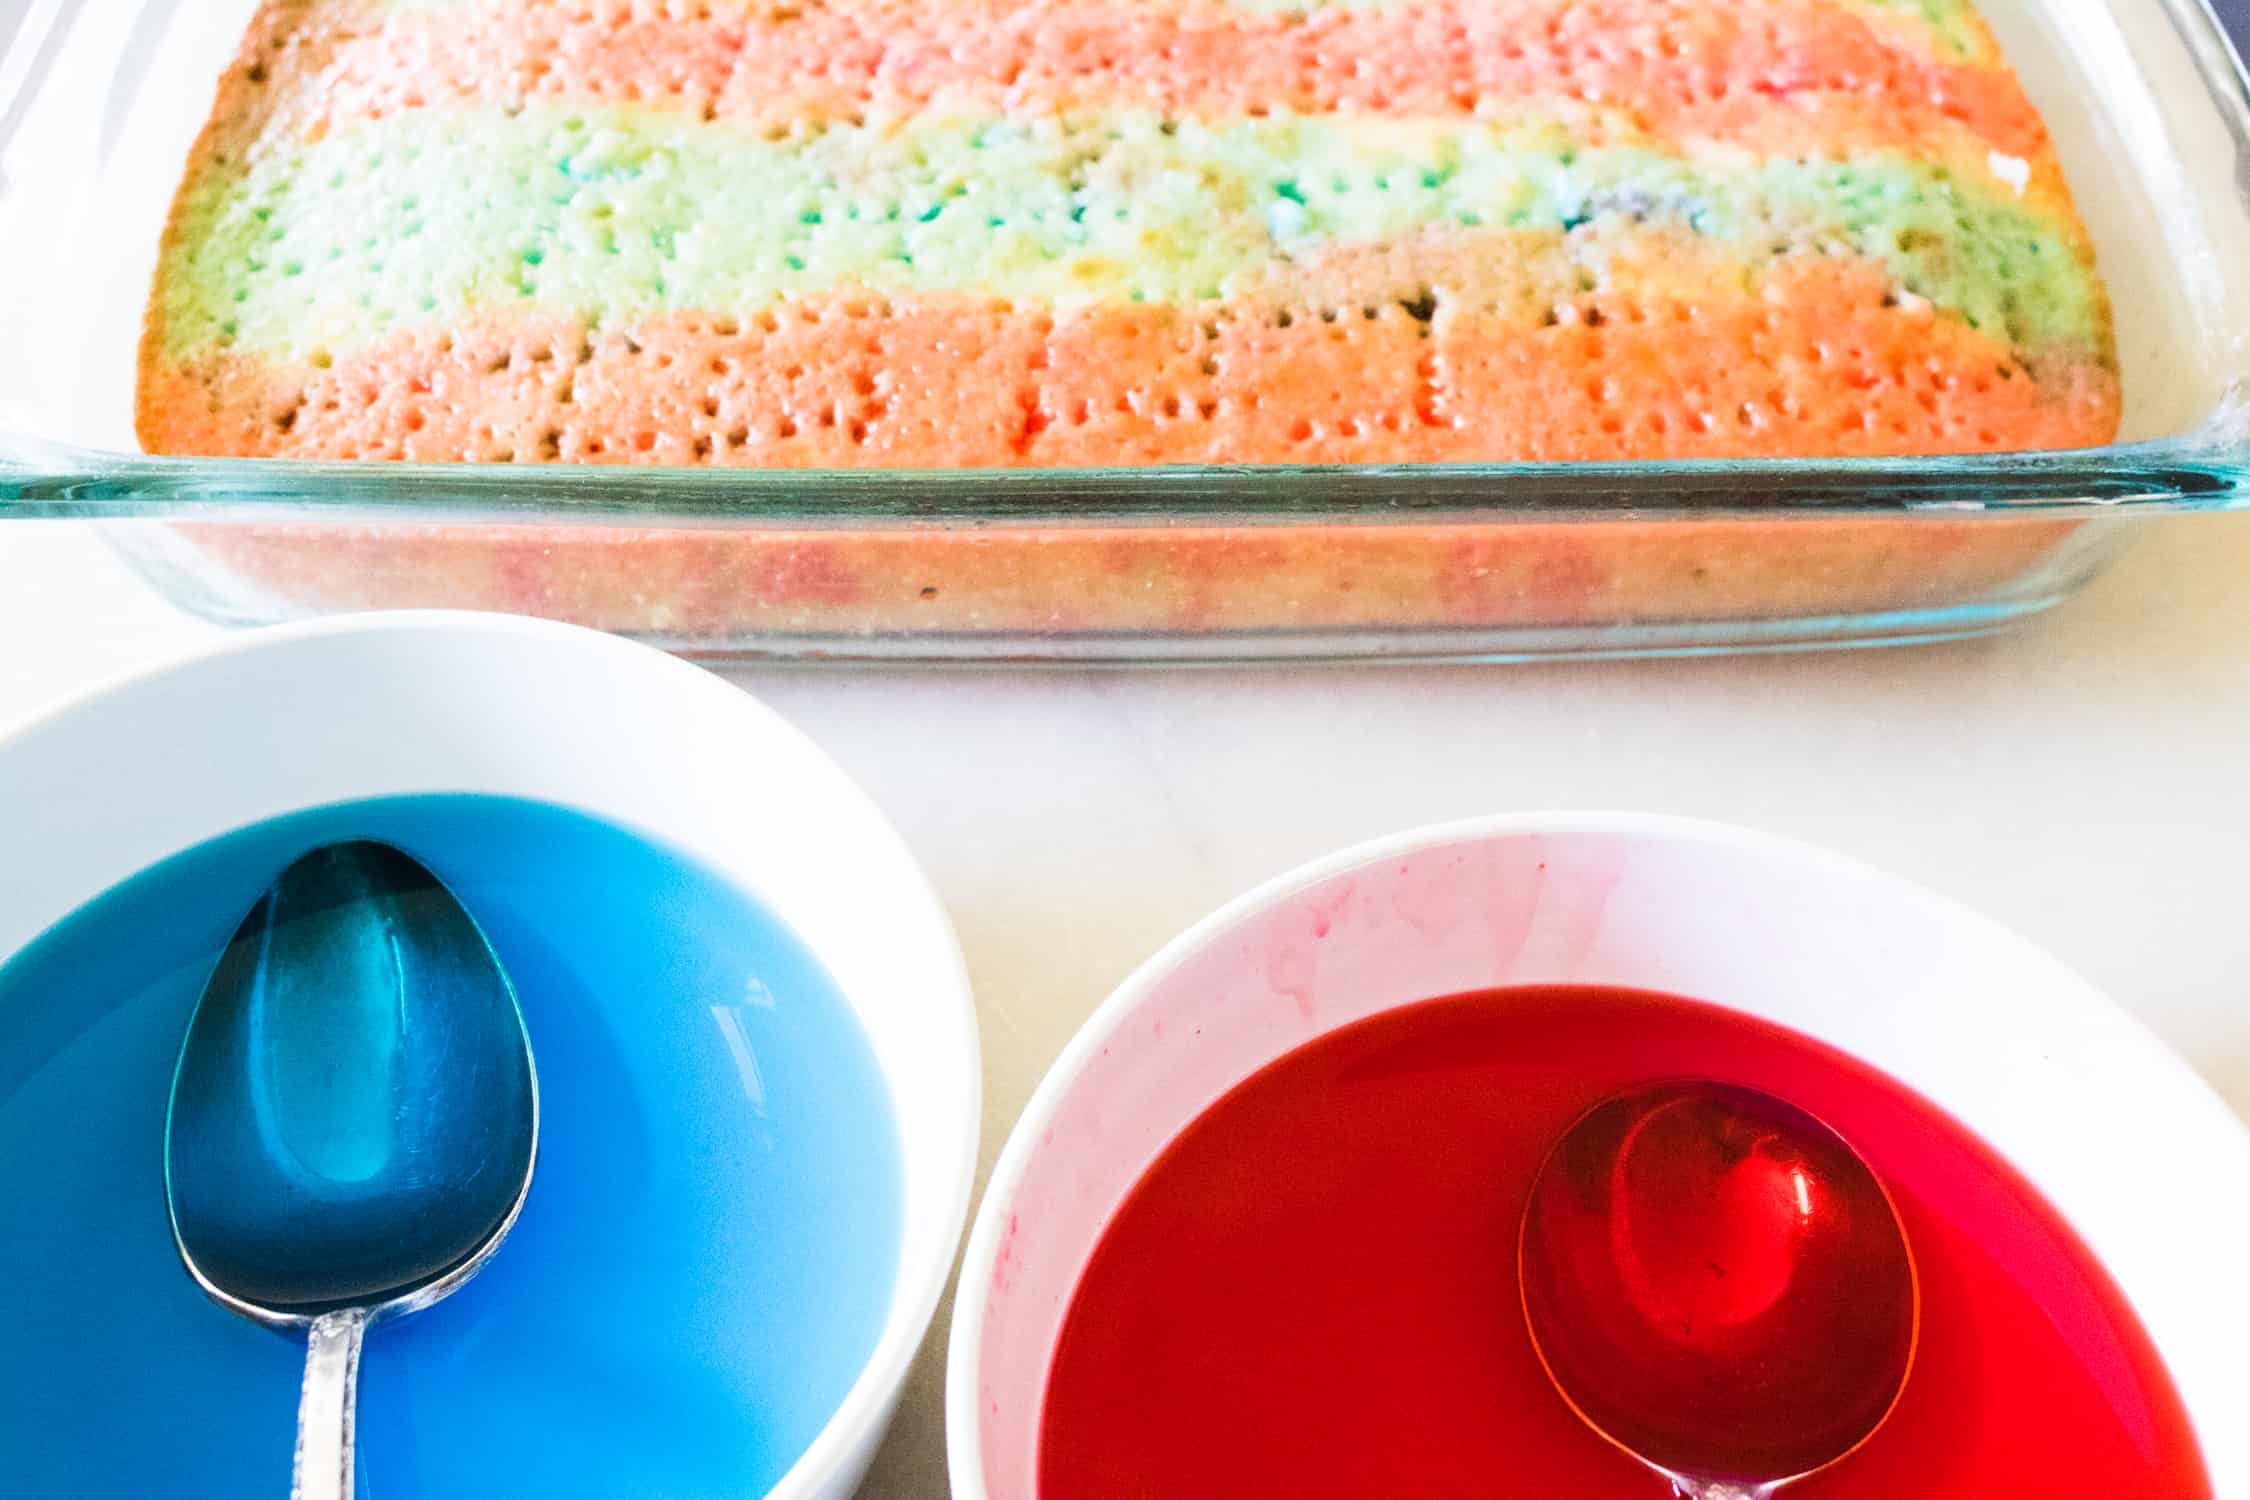 prepared white sheet cake inside a baking dish next to a bowl of blue gelatin and a bowl of red gelatin